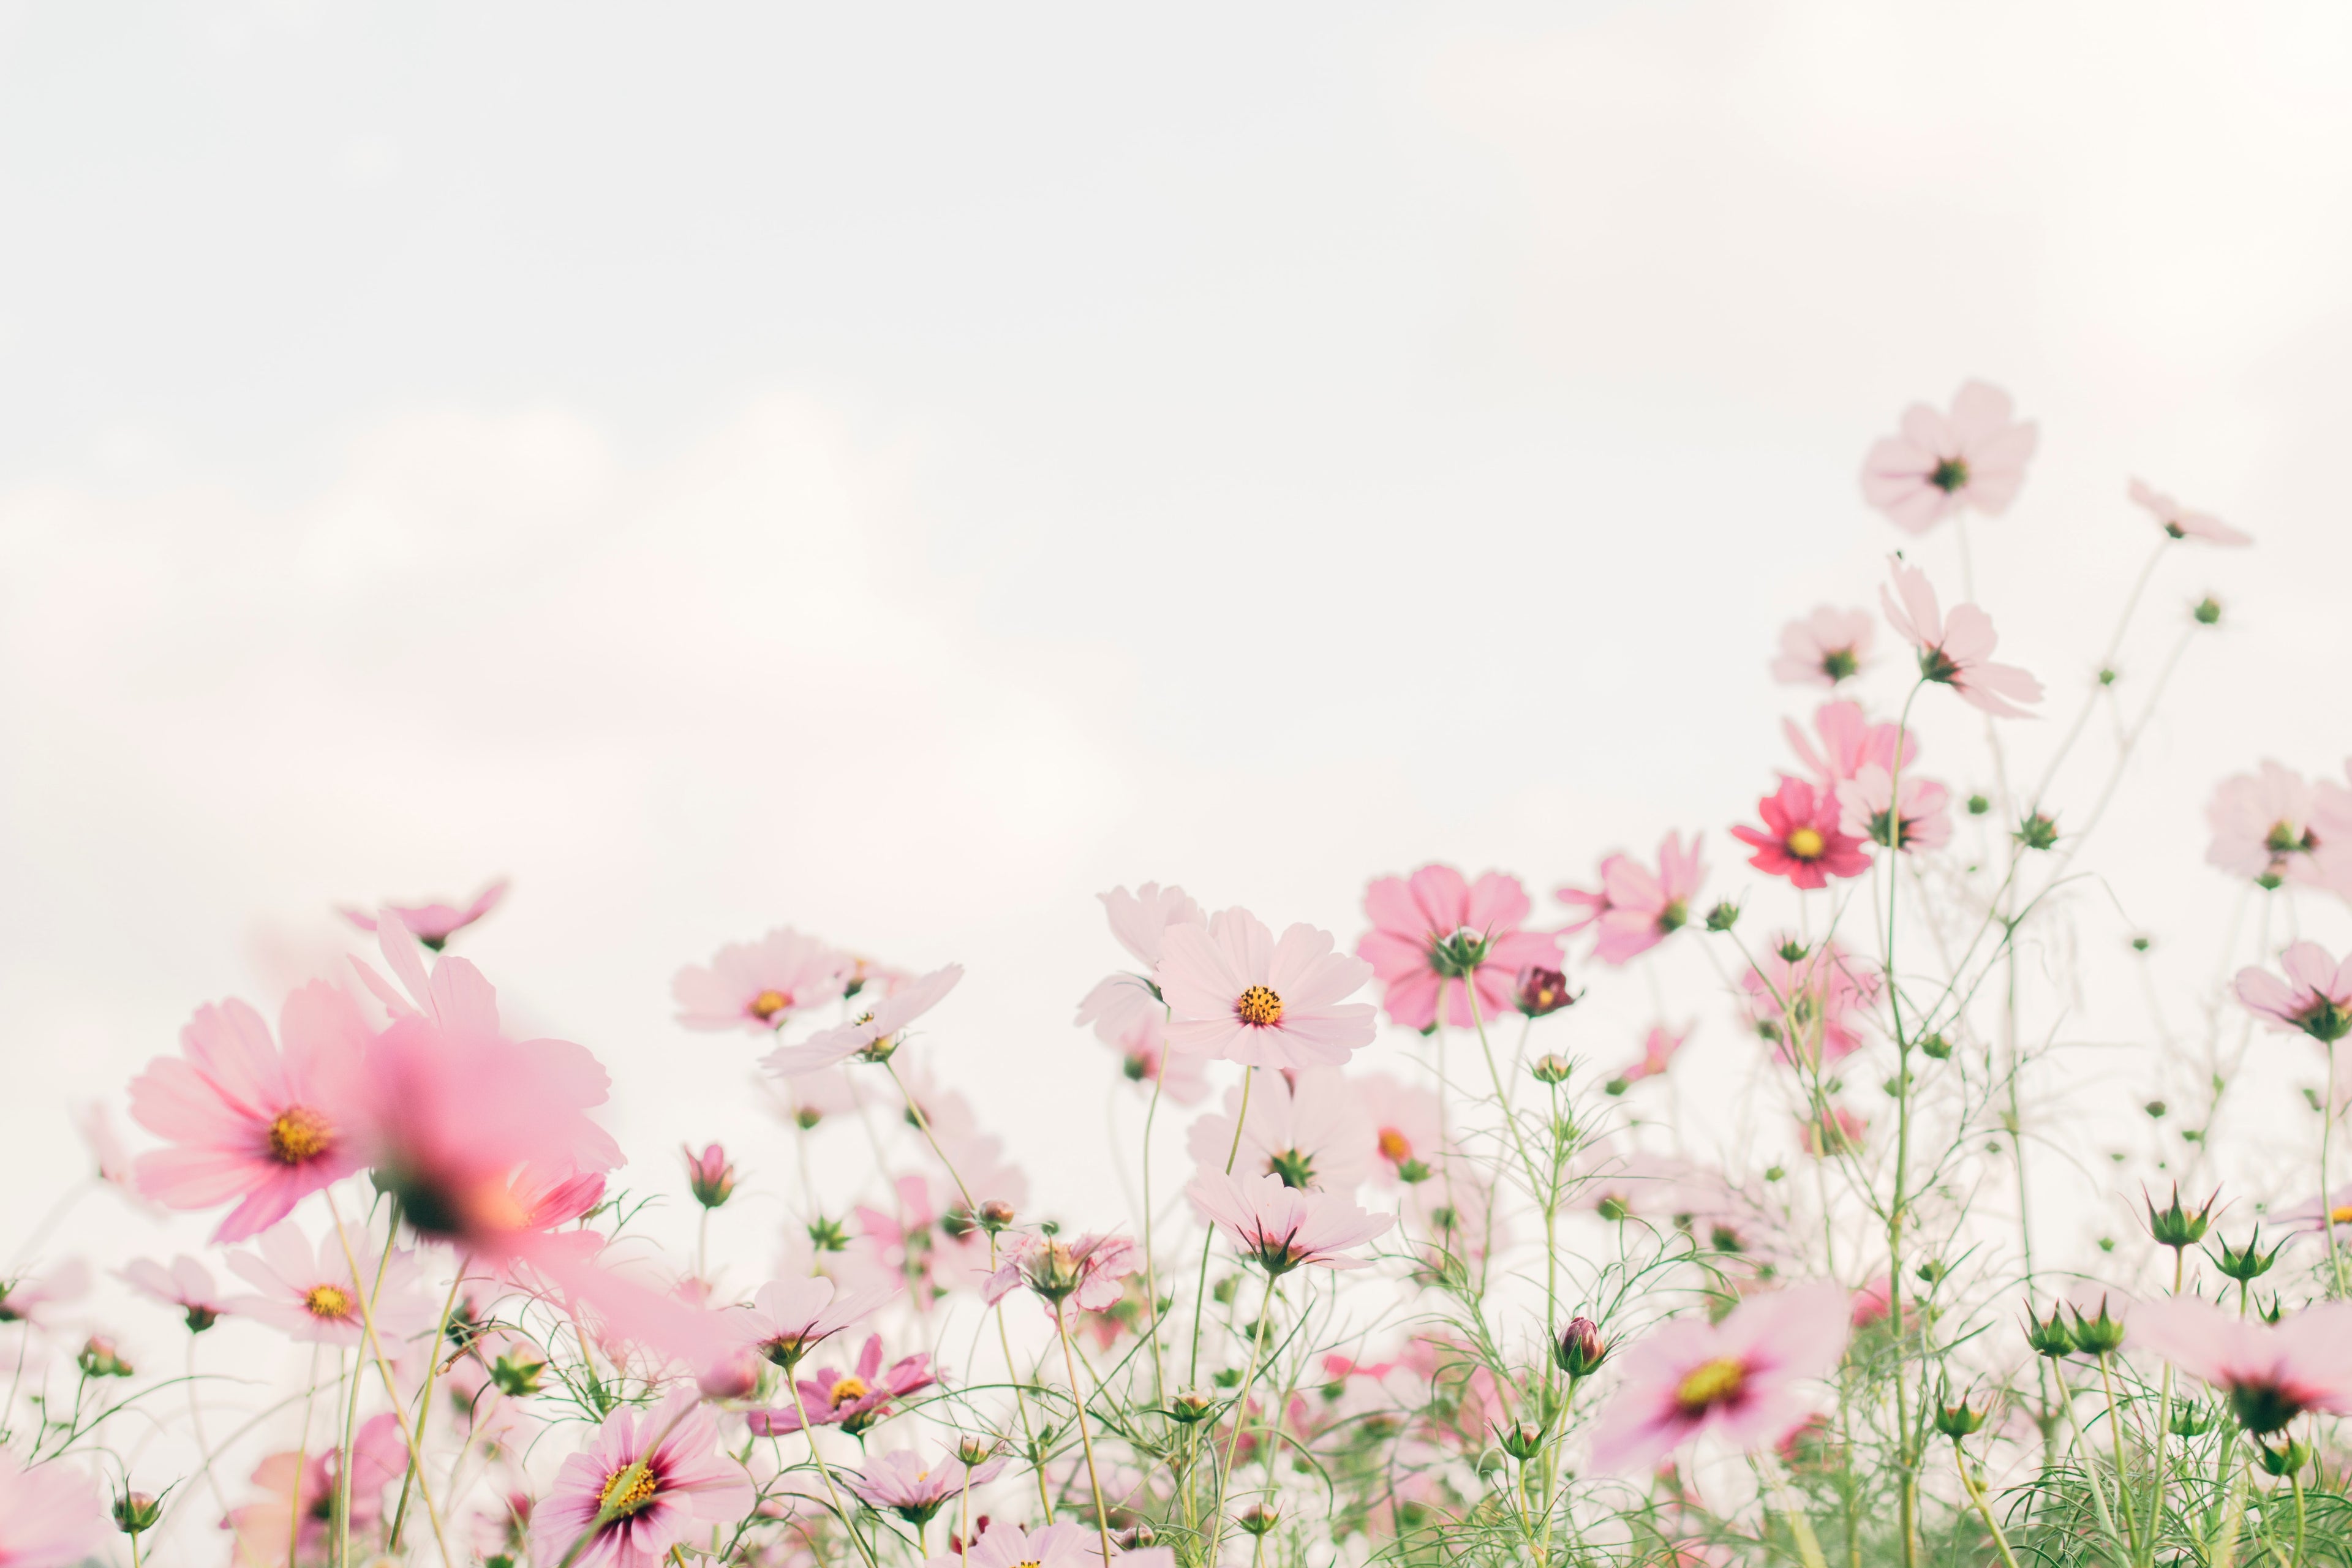 Cosmos flowers  Therapy of flowers